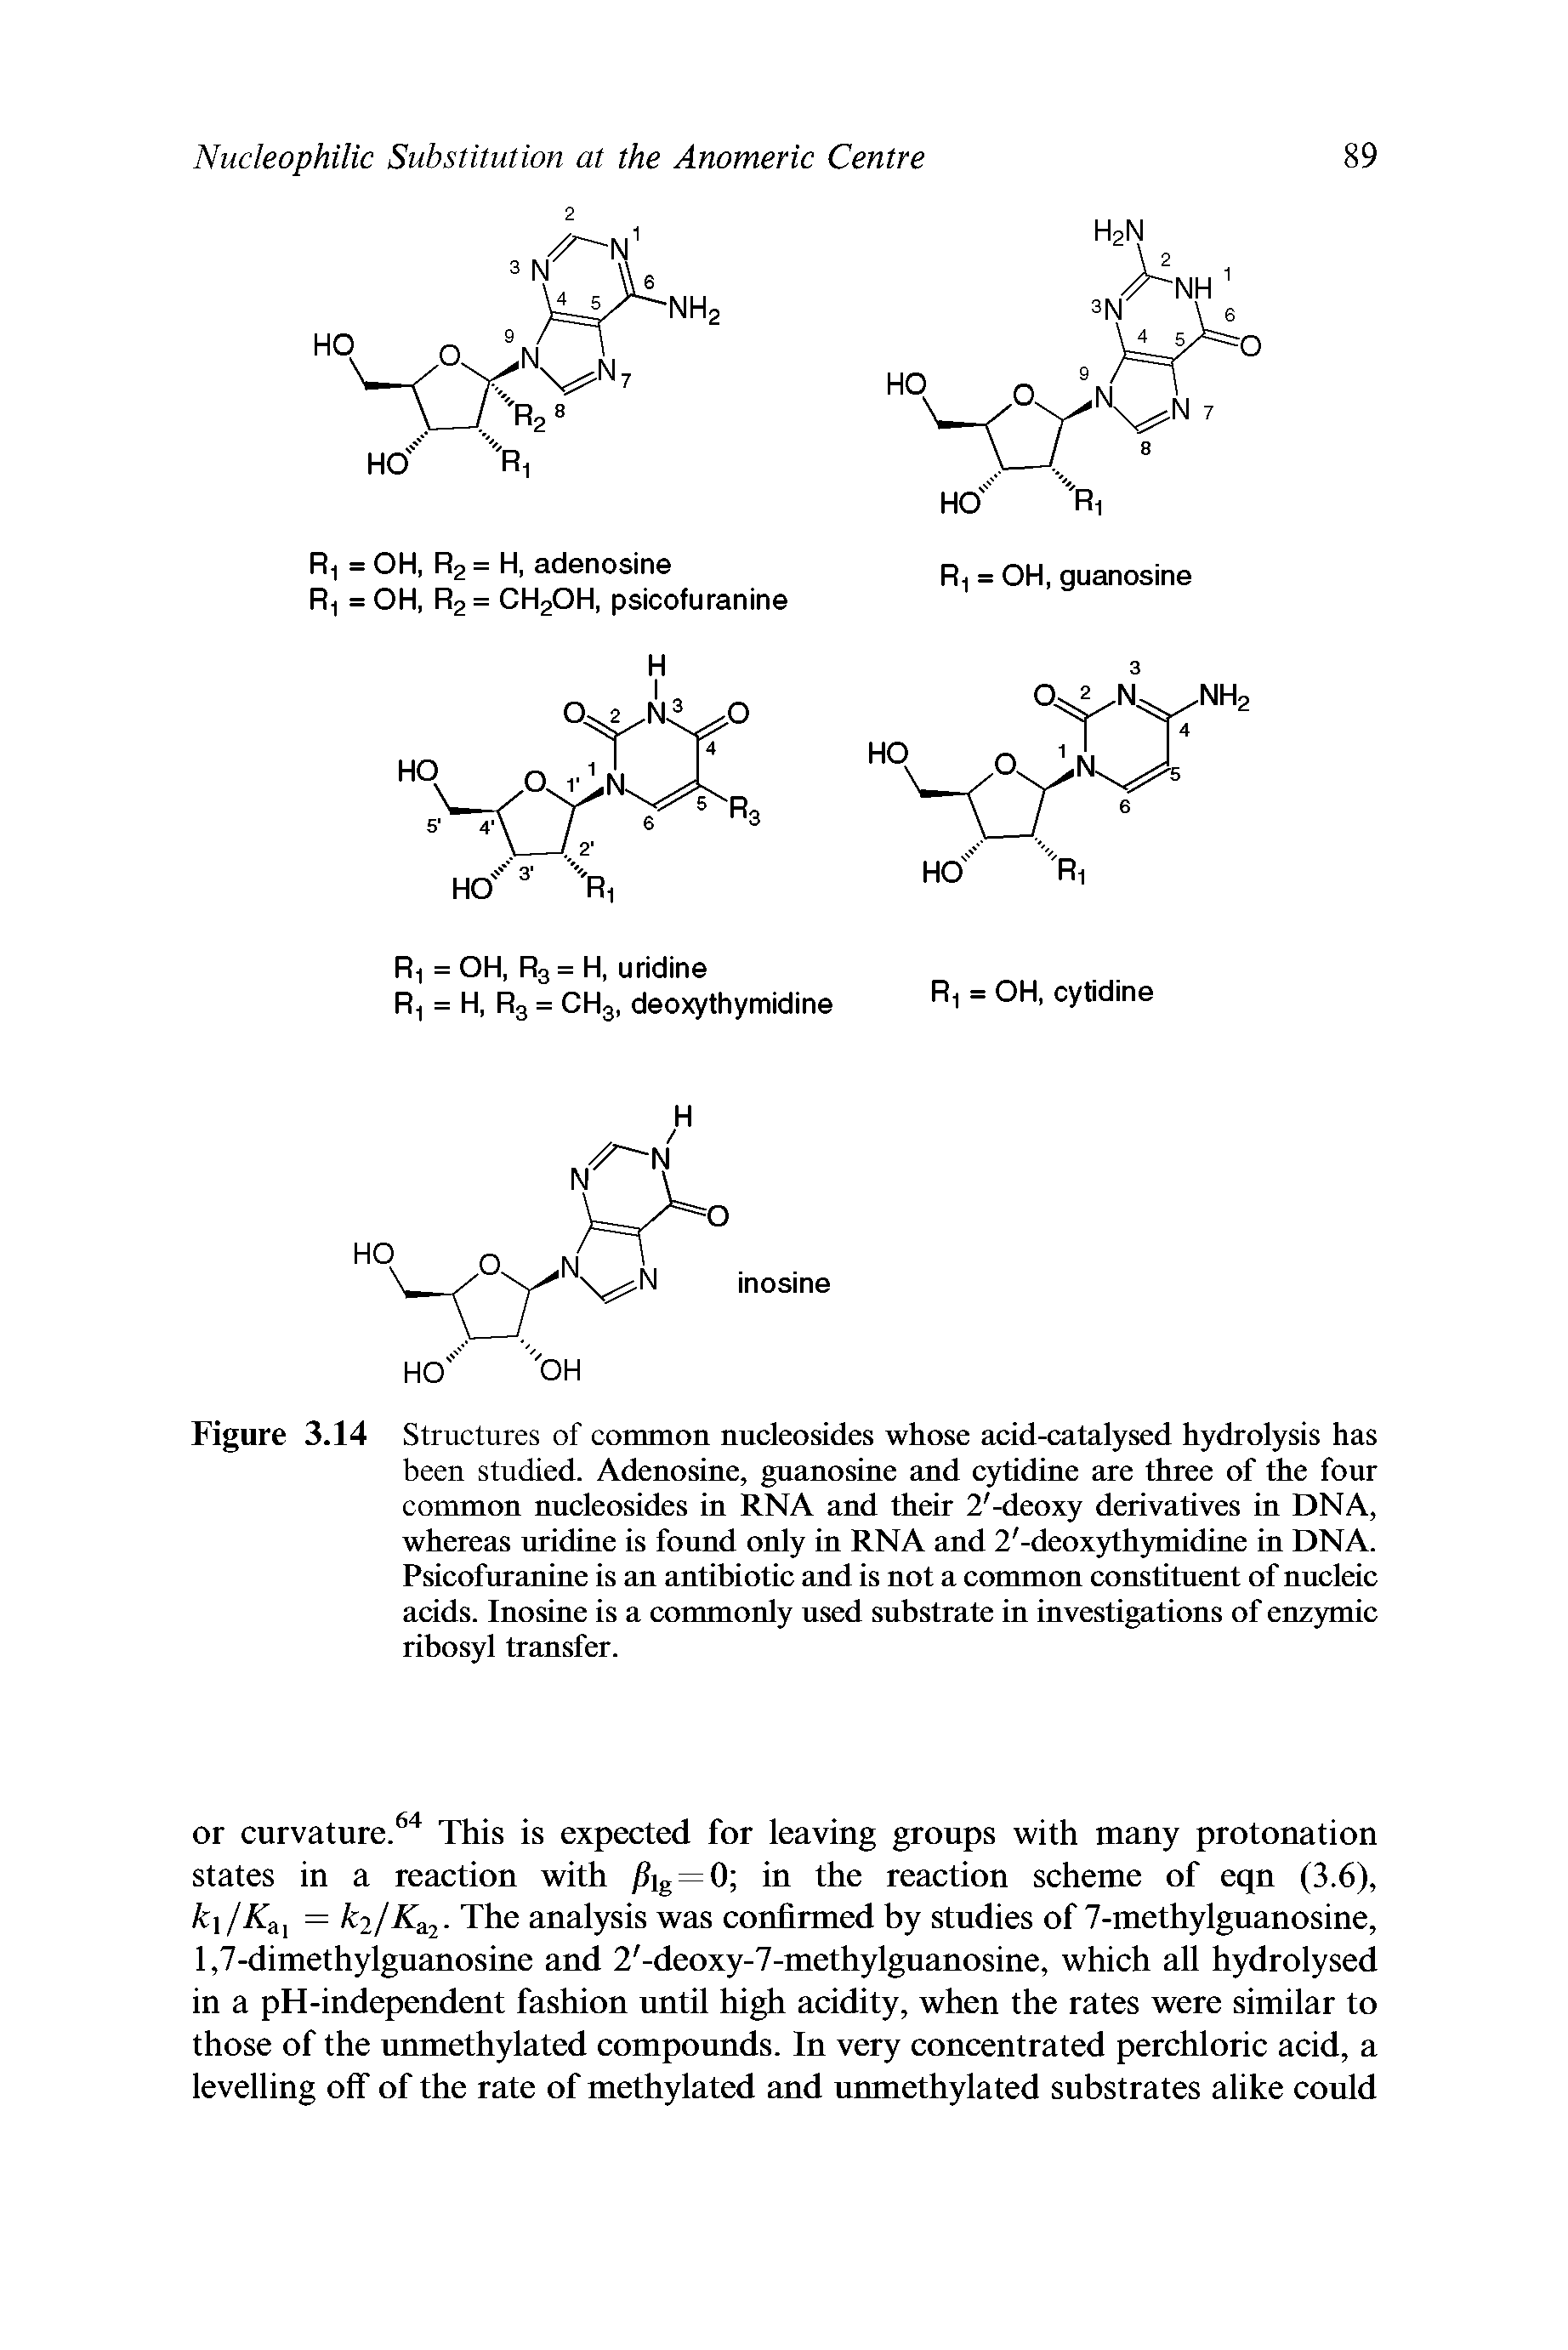 Figure 3.14 Structures of common nucleosides whose acid-catalysed hydrolysis has been studied. Adenosine, guanosine and cytidine are three of the four common nucleosides in RNA and their 2 -deoxy derivatives in DNA, whereas uridine is found only in RNA and 2 -deox5hh5midine in DNA. Psicofuranine is an antibiotic and is not a common constituent of nucleic acids. Inosine is a commonly used substrate in investigations of enzymic ribosyl transfer.